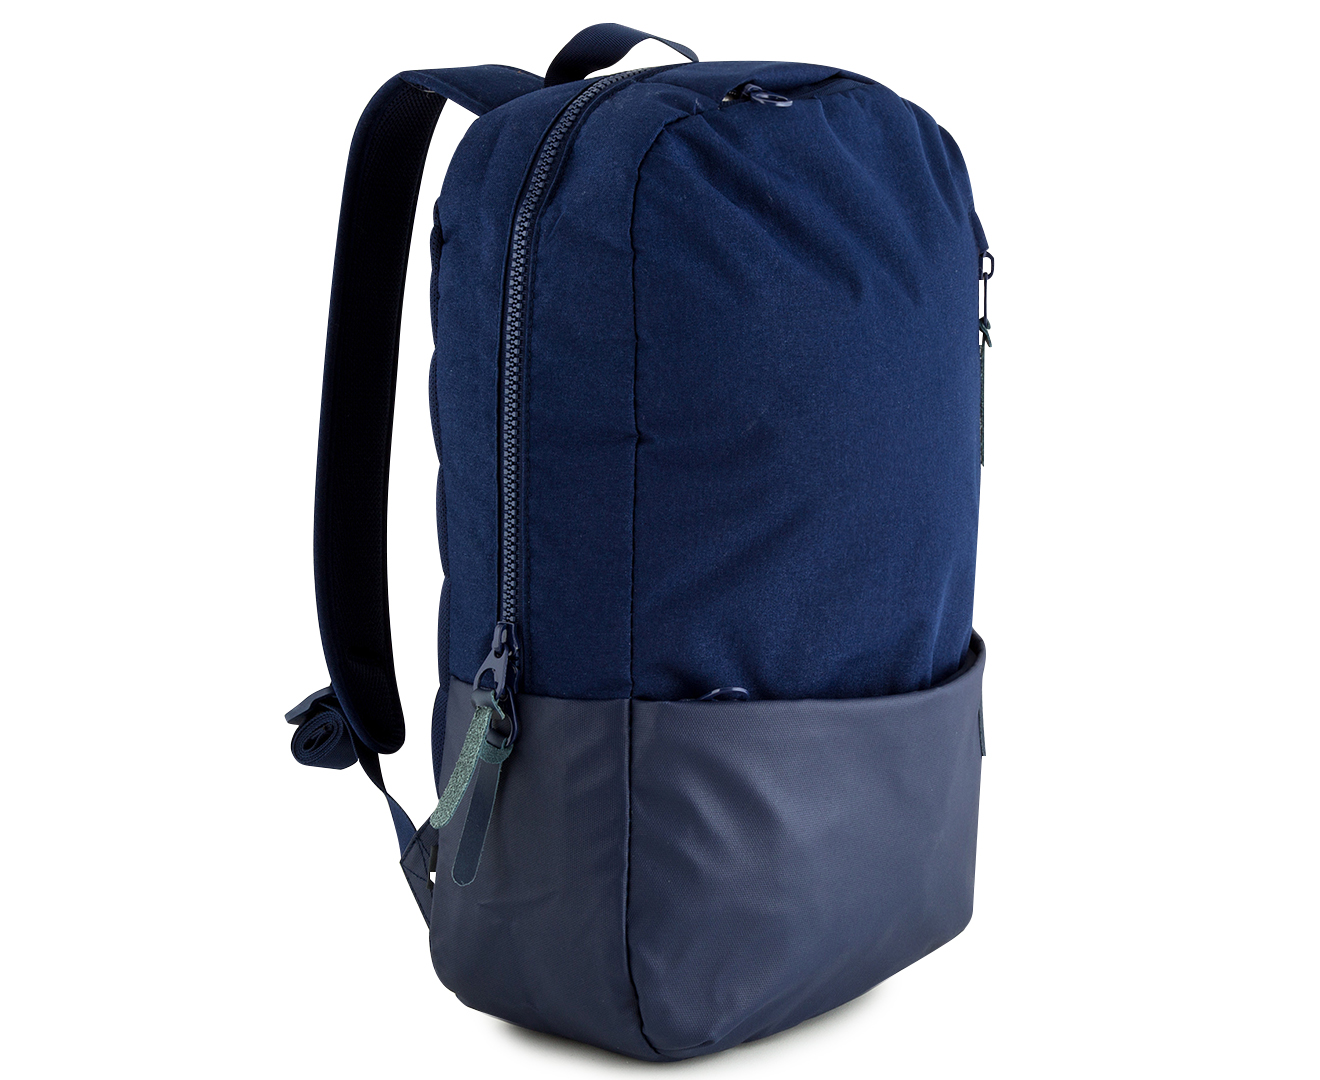 Incase Compass Backpack For 15-Inch MacBook Pro - Navy | Catch.com.au